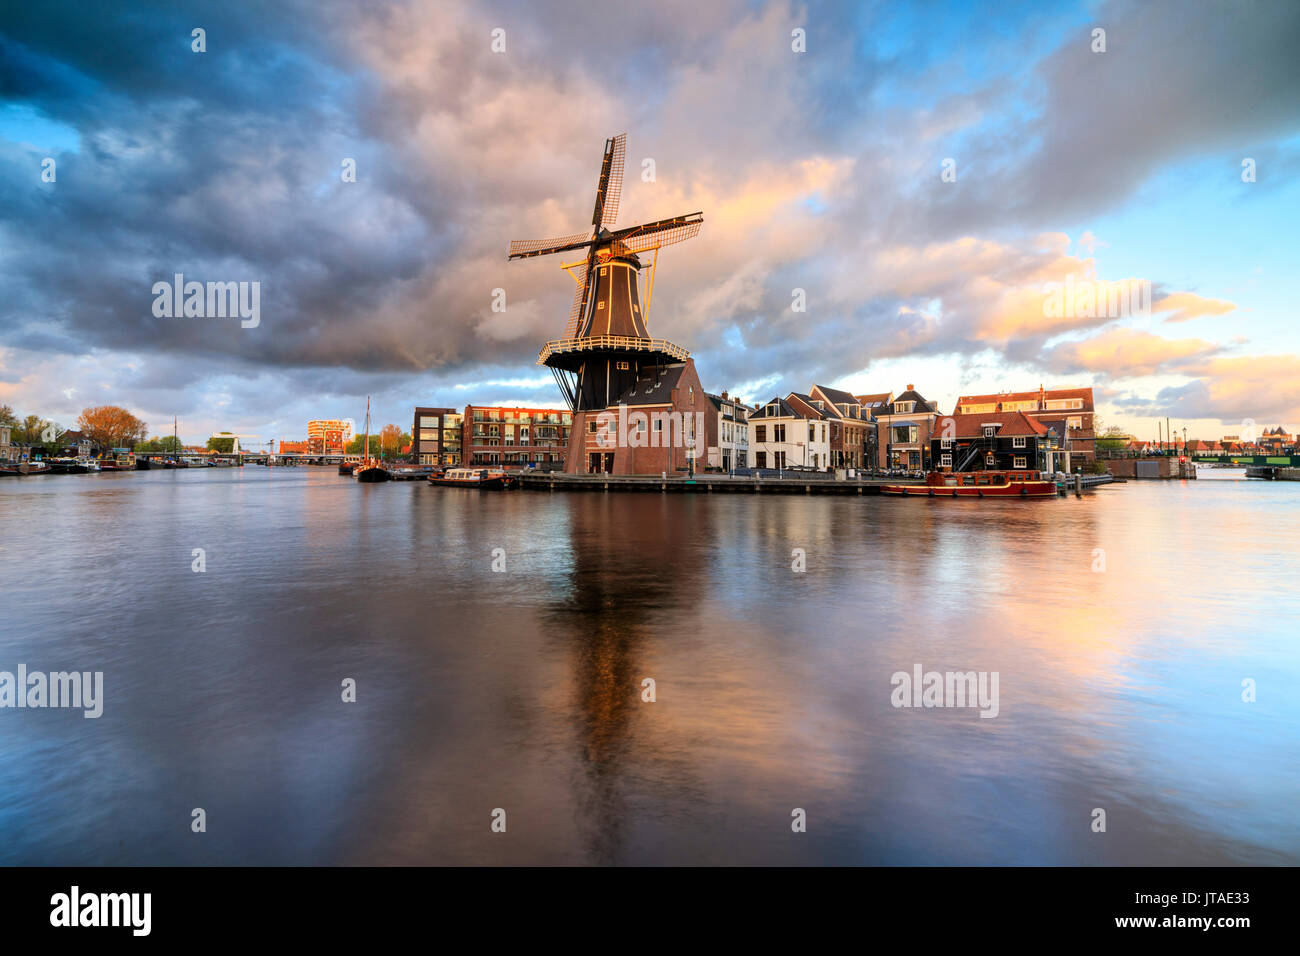 Pink clouds at sunset on the Windmill De Adriaan reflected in the River Spaarne, Haarlem, North Holland, The Netherlands, Europe Stock Photo